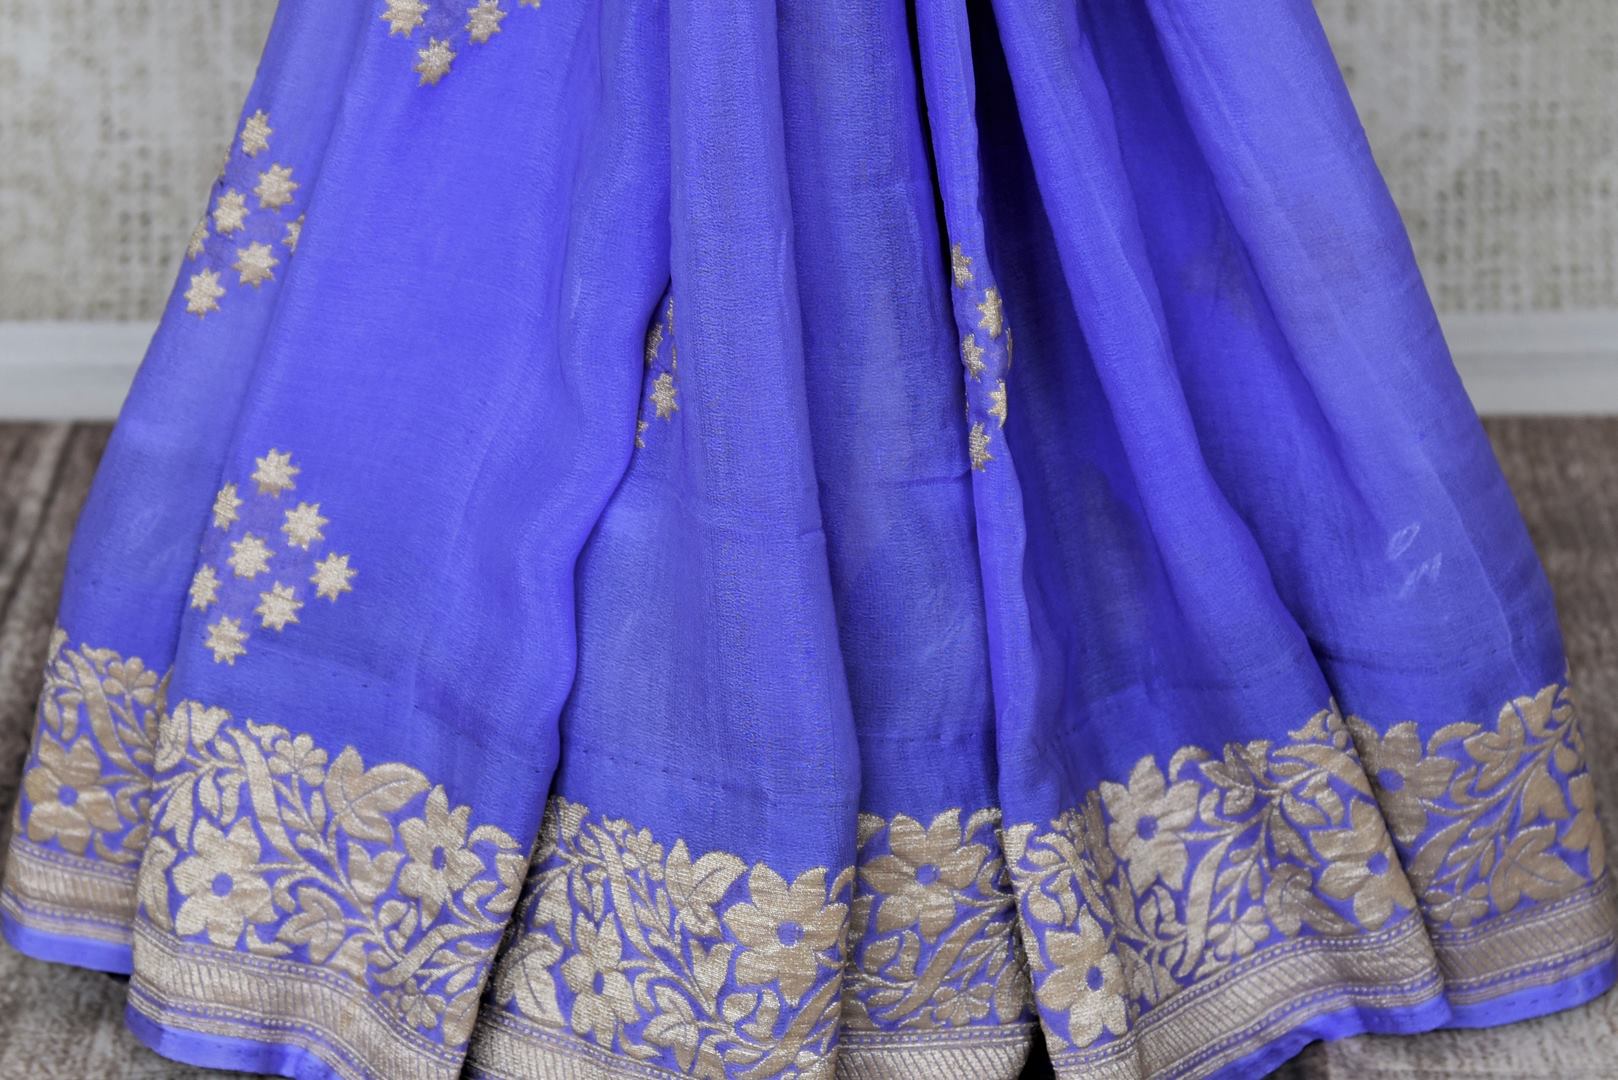 Buy mauve purple georgette Banarasi saree online in USA with silver foliate zari border. Elevate your traditional saree style with beautiful Indian Banarasi saris from Pure Elegance Indian fashion store in USA. We also have a stunning variety of bridal saris for Indian brides in USA. Shop now.-pleats